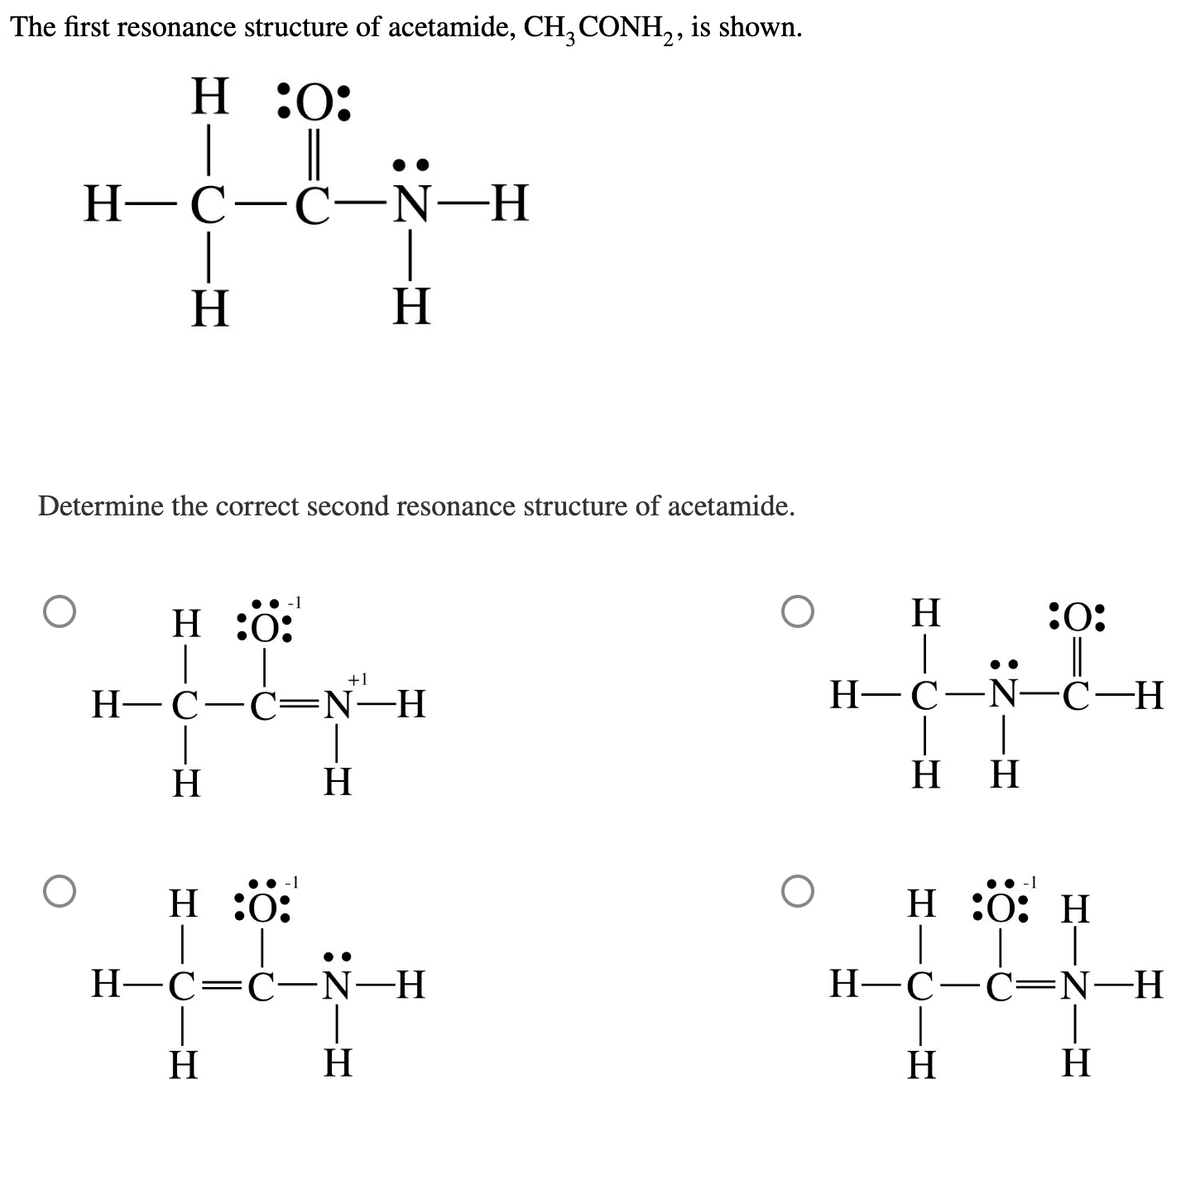 The first resonance structure of acetamide, CH3 CONH2, is shown.
H :0:
☐ ||
H-C-C-N-H
H
H
Determine the correct second resonance structure of acetamide.
H :0:
-1
+1
H-C-C-N-H
H
H
H :0:
-1
☐ ☐
H-C=C-N-H
H
H
H
:0:
H-C-N-C-H
HH
●● -1
H:0: H
H-C-C=N—H
H
H